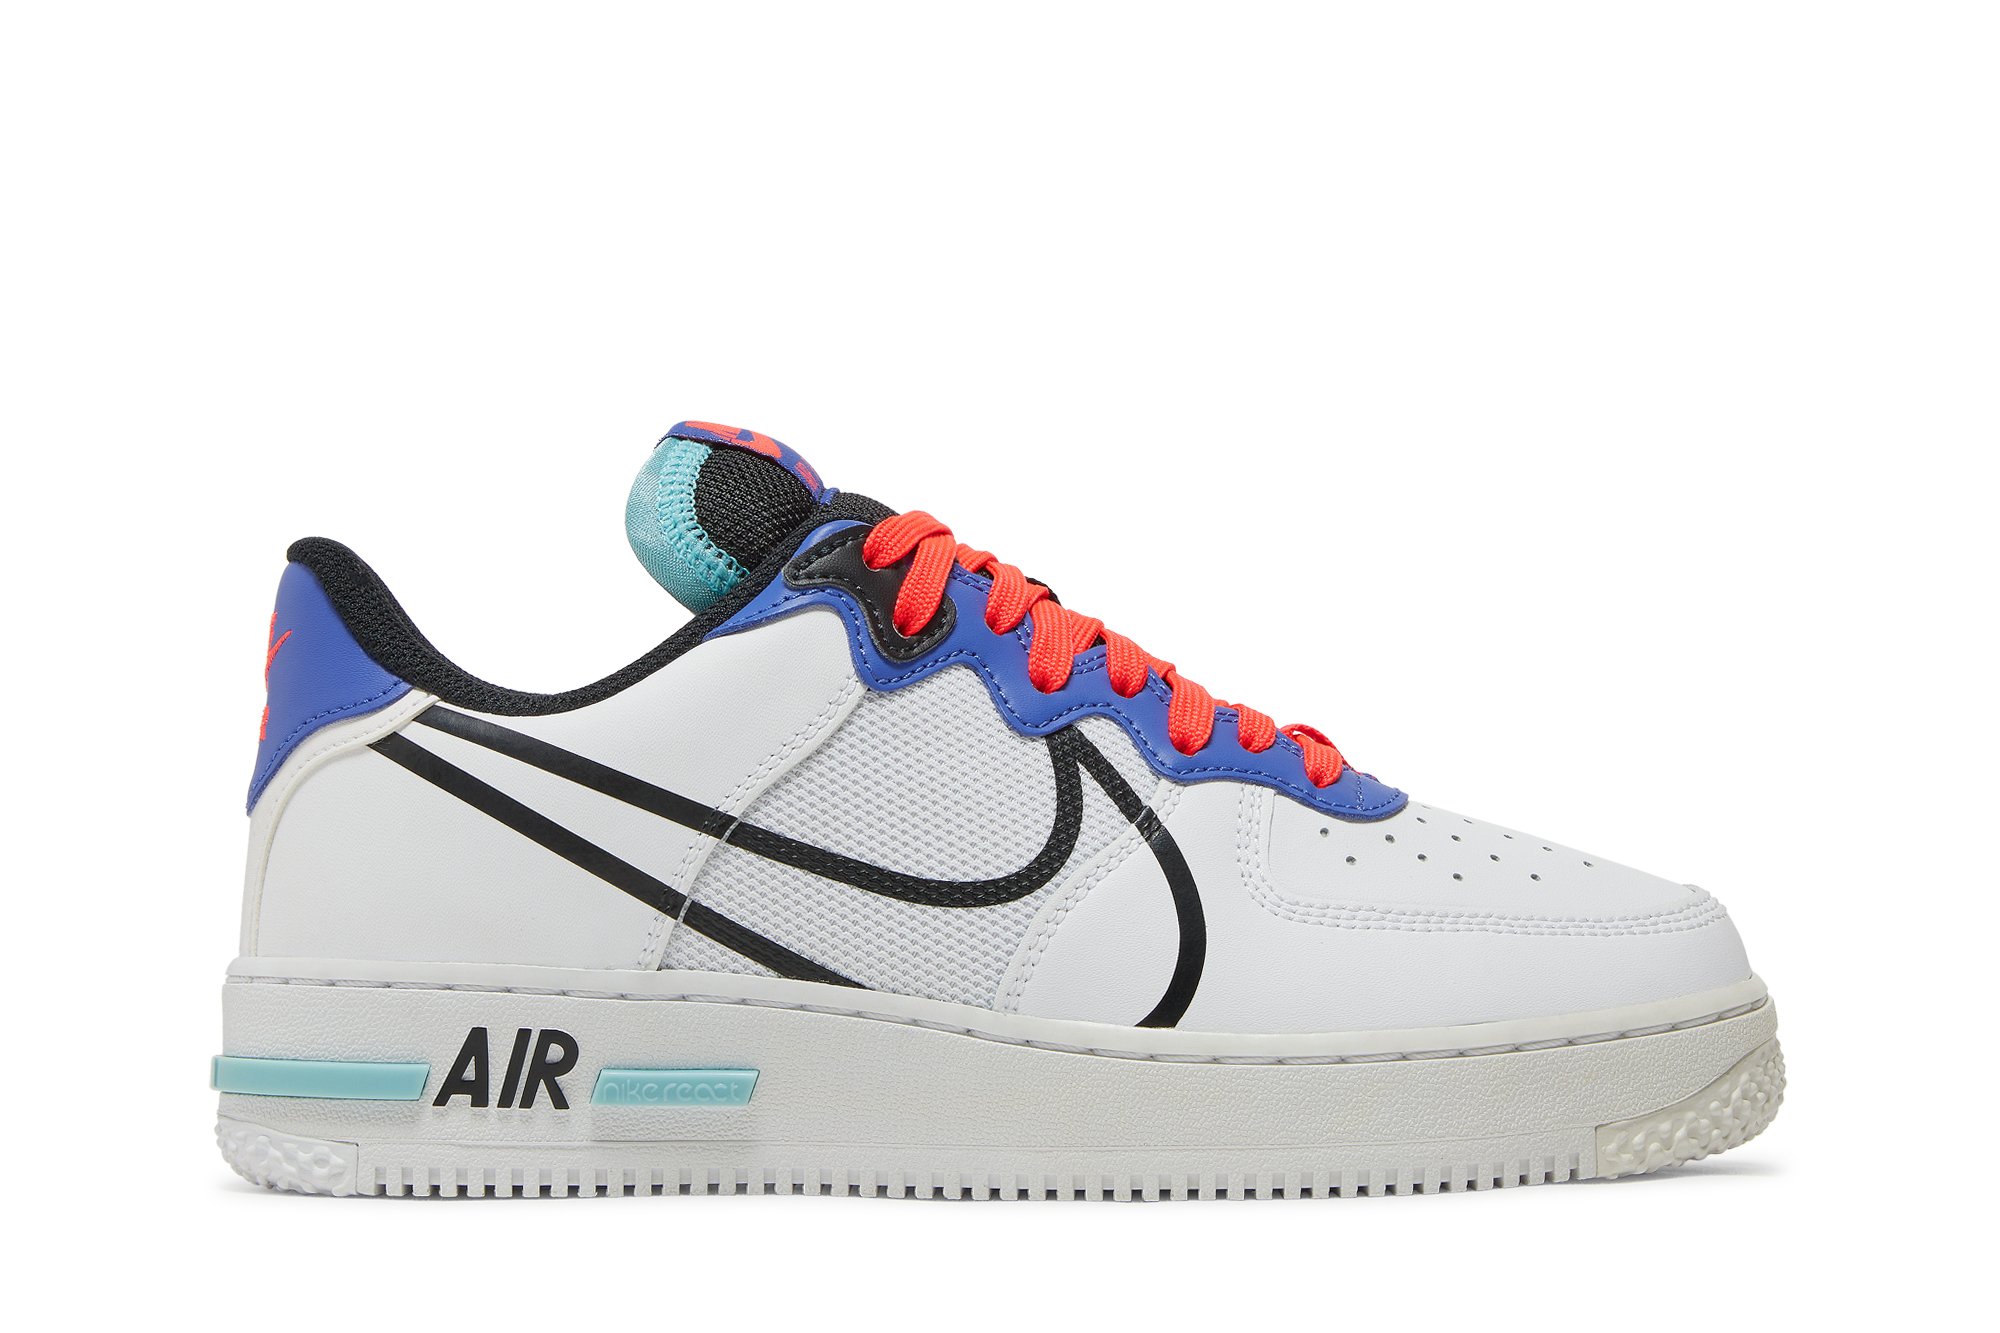 Buy Air Force 1 React 'Astronomy Blue' - CT1020 102 | GOAT